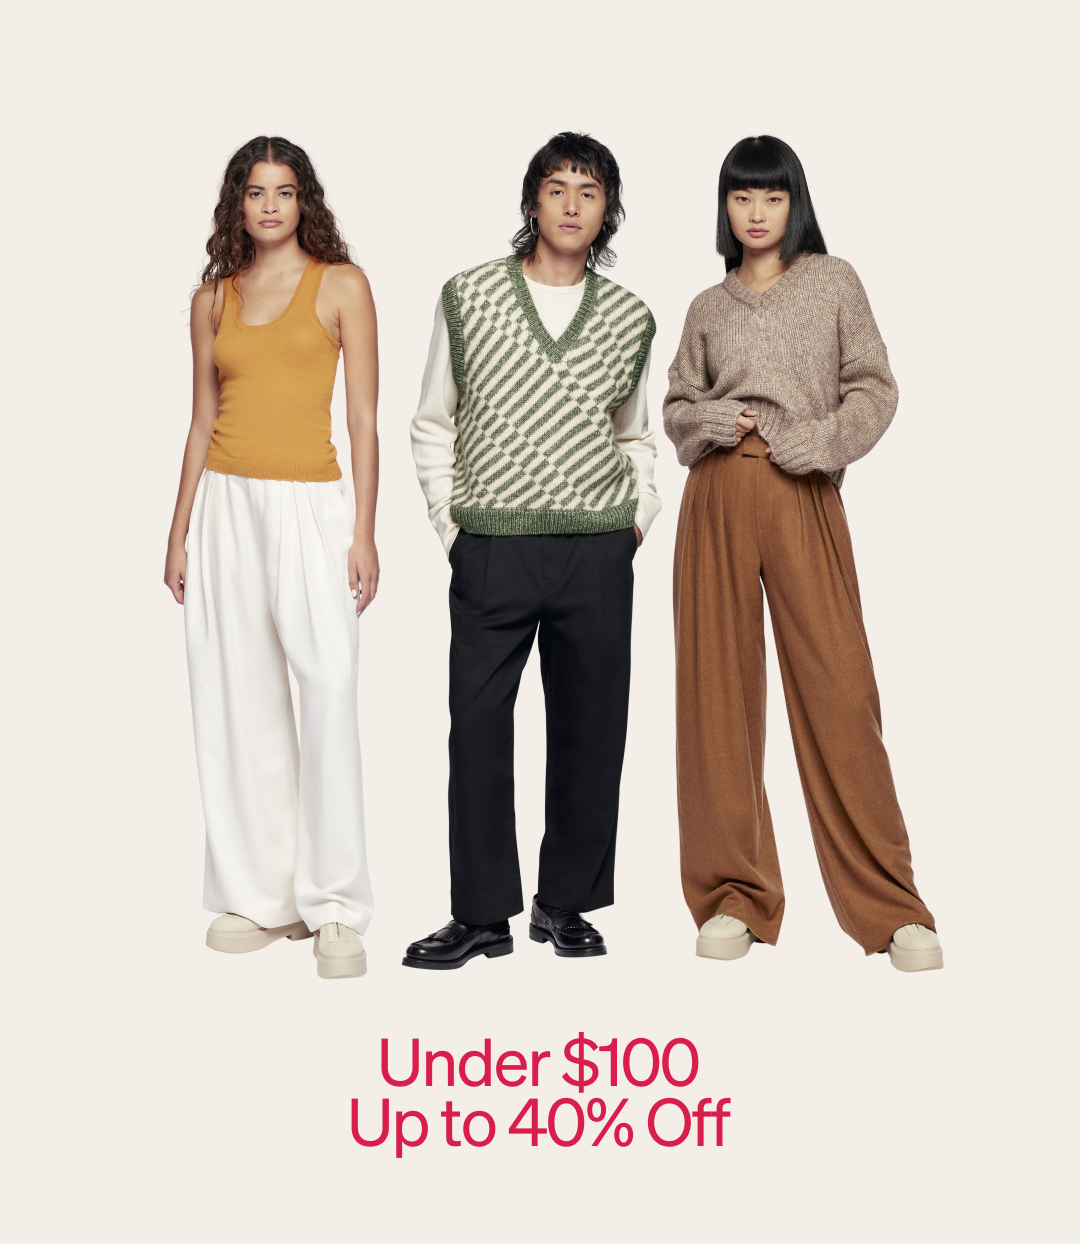 Under $100 up to 40% off